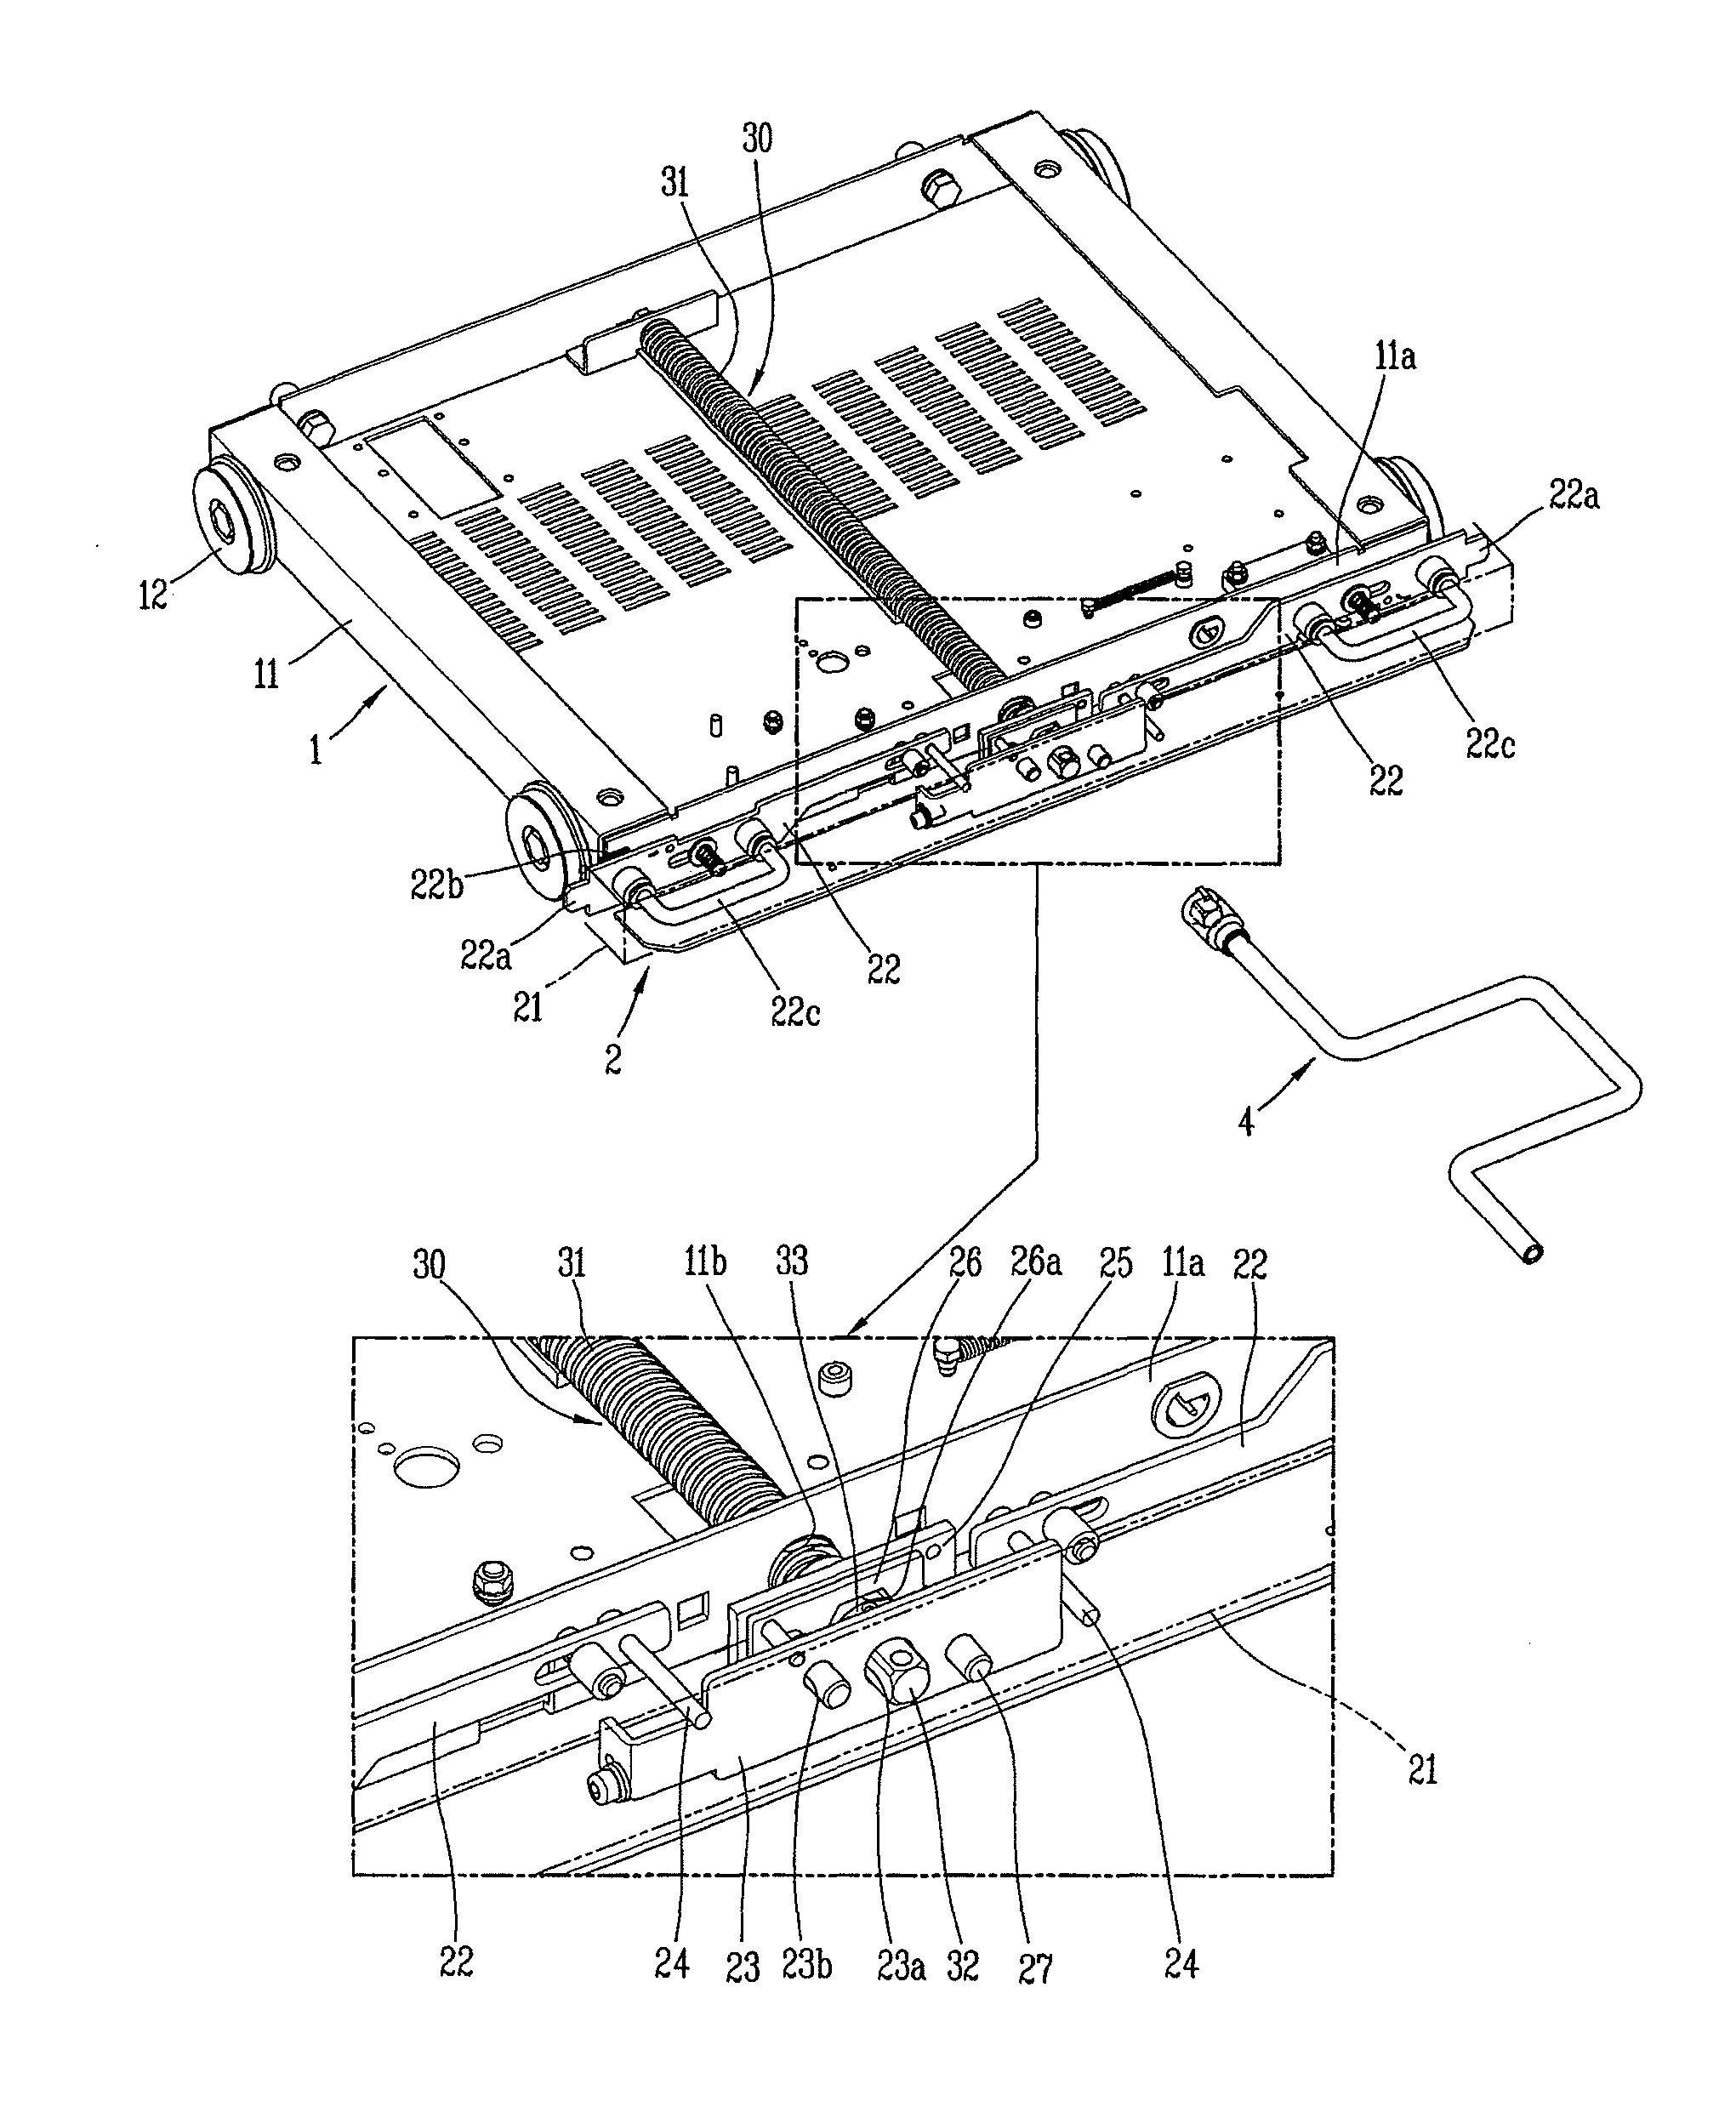 Device for preventing withdrawing and inserting of a circuit breaker